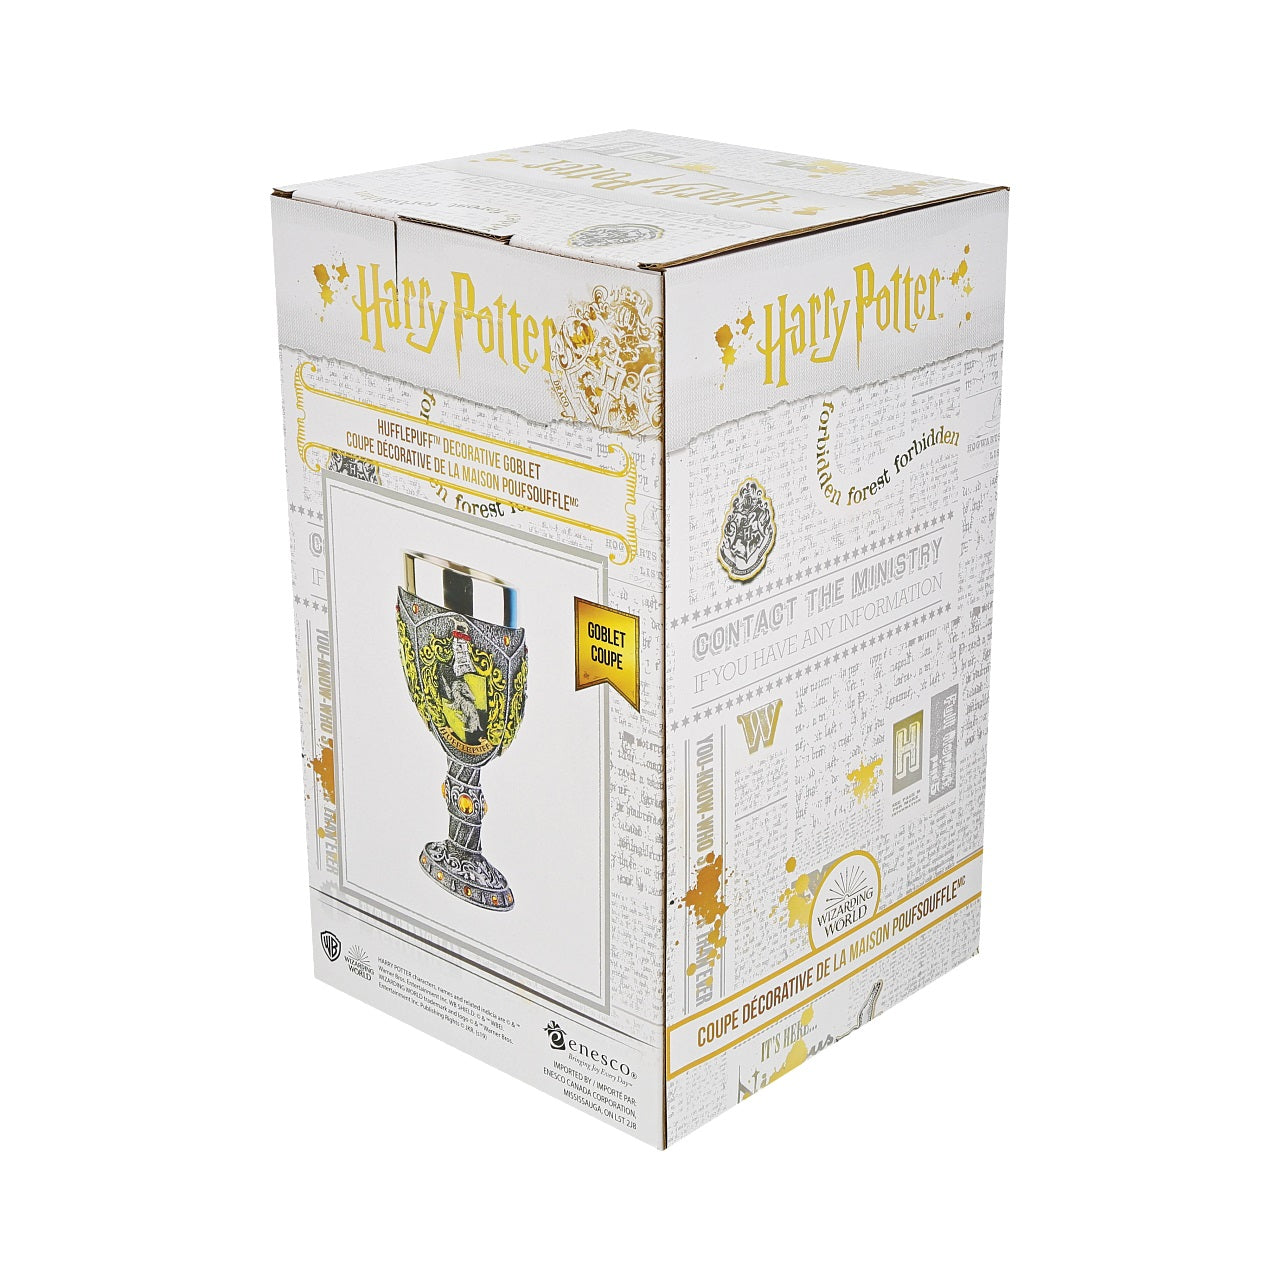 Harry Potter Hufflepuff Decorative Goblet  Hufflepuffs value hard work, patience, loyalty, and fair play. Symbolized by the badger, Helga Hufflepuff accepted and welcomed witches and wizards of all kind, and her house made many misfits strong.